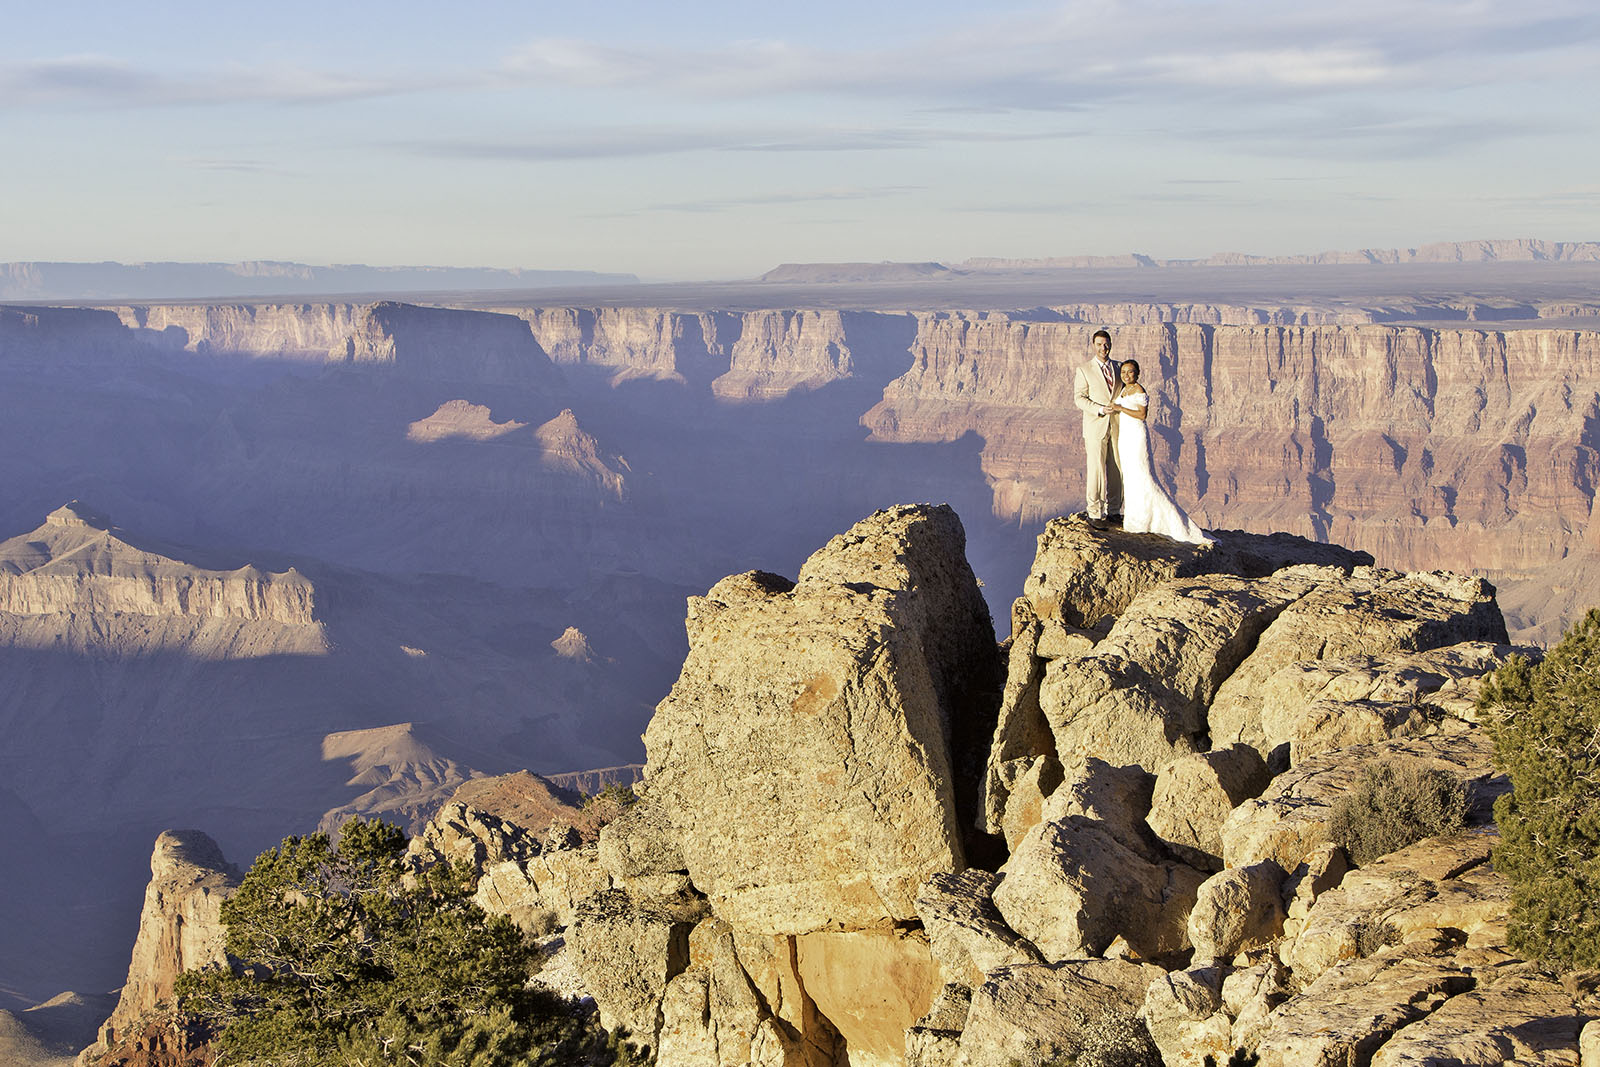 An American Groom and a Thai Bride having their wedding pictures taken at the Grand Canyon, Arizona